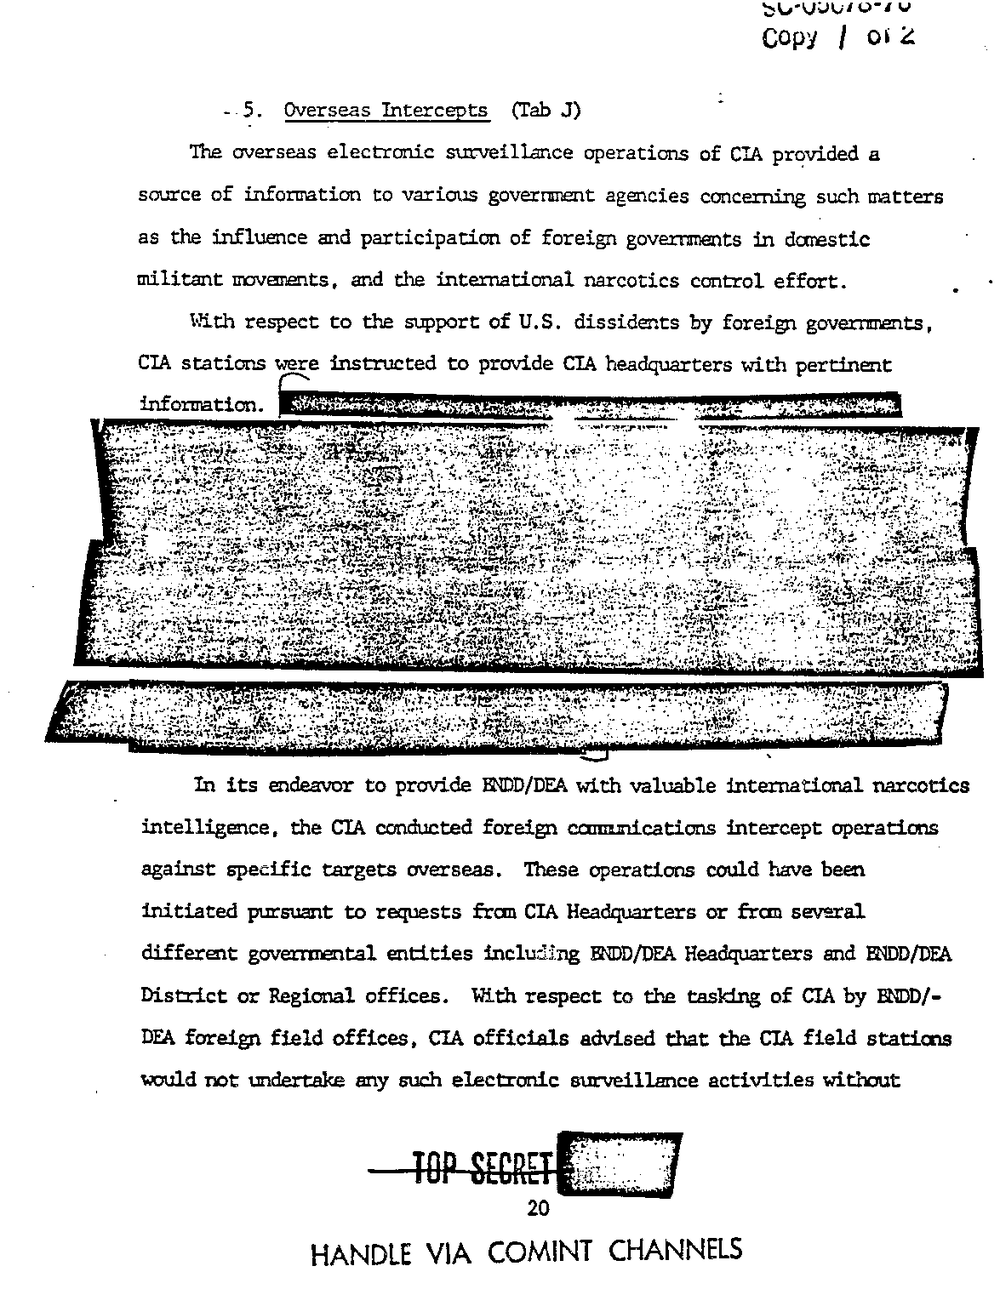 Page 28 from Report on Inquiry Into CIA Related Electronic Surveillance Activities